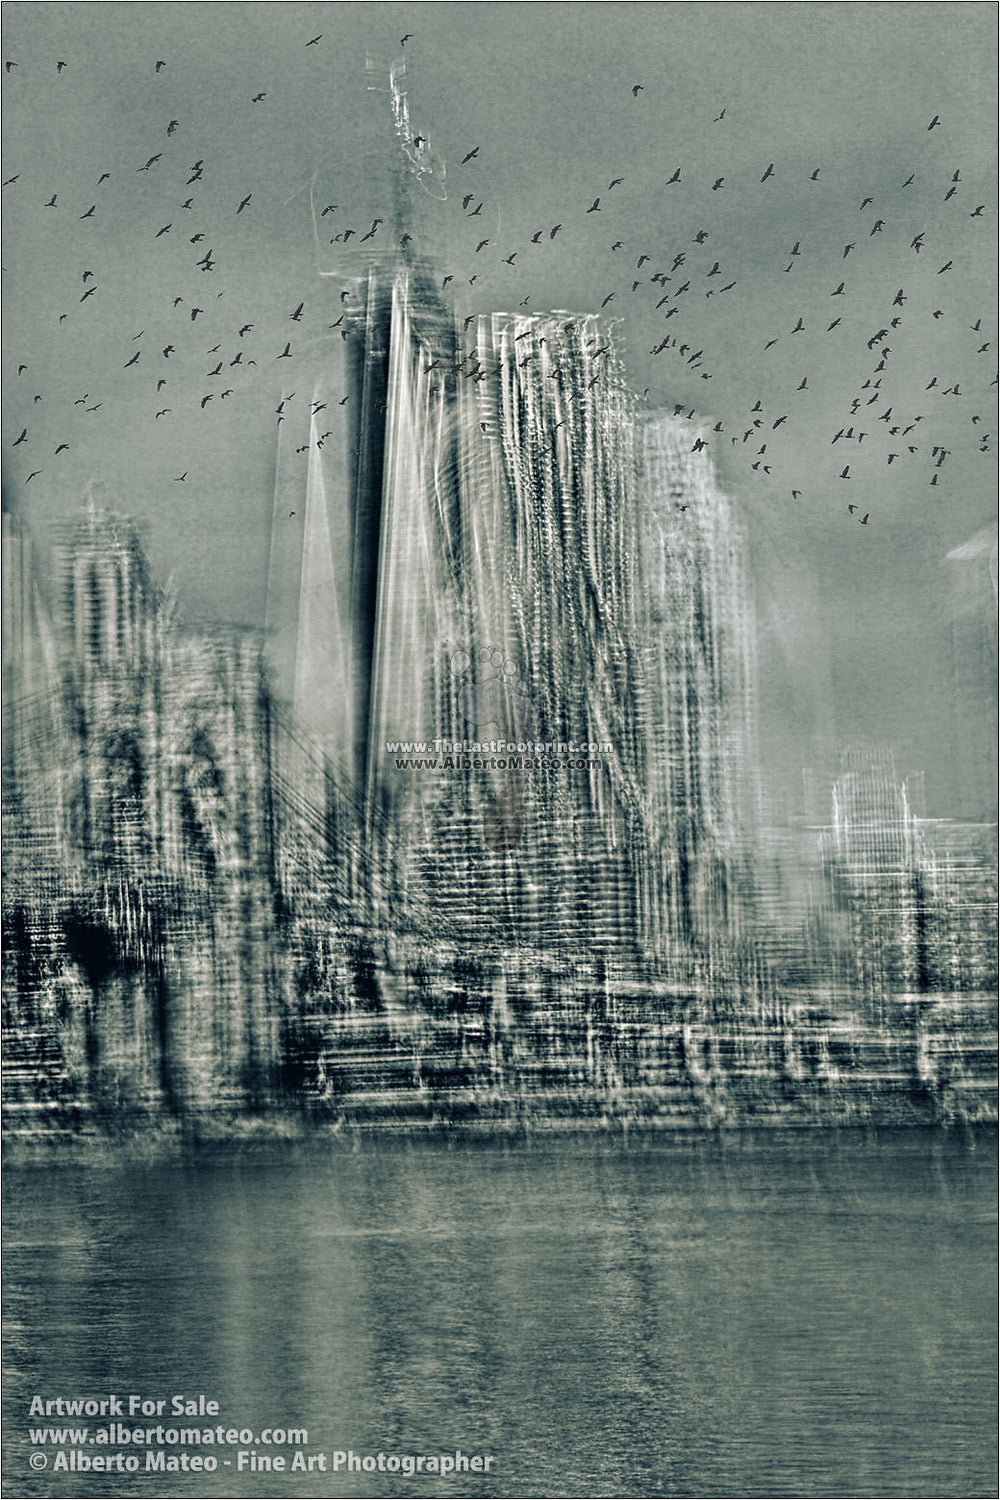 Lower Manhattan Towers, from 'Way to Freedom' Series. [1/6]